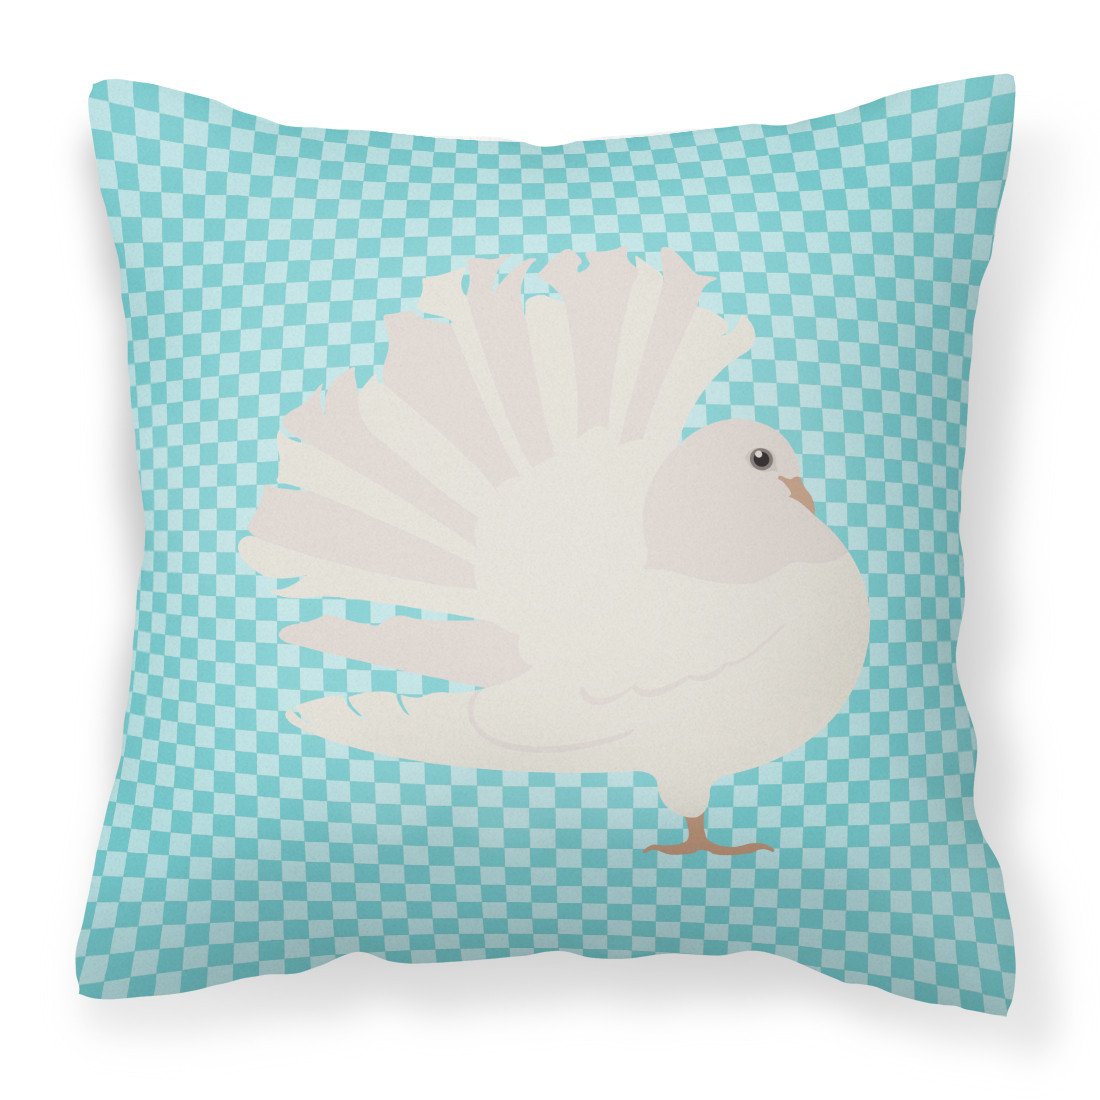 Silver Fantail Pigeon Blue Check Fabric Decorative Pillow BB8124PW1818 by Caroline's Treasures